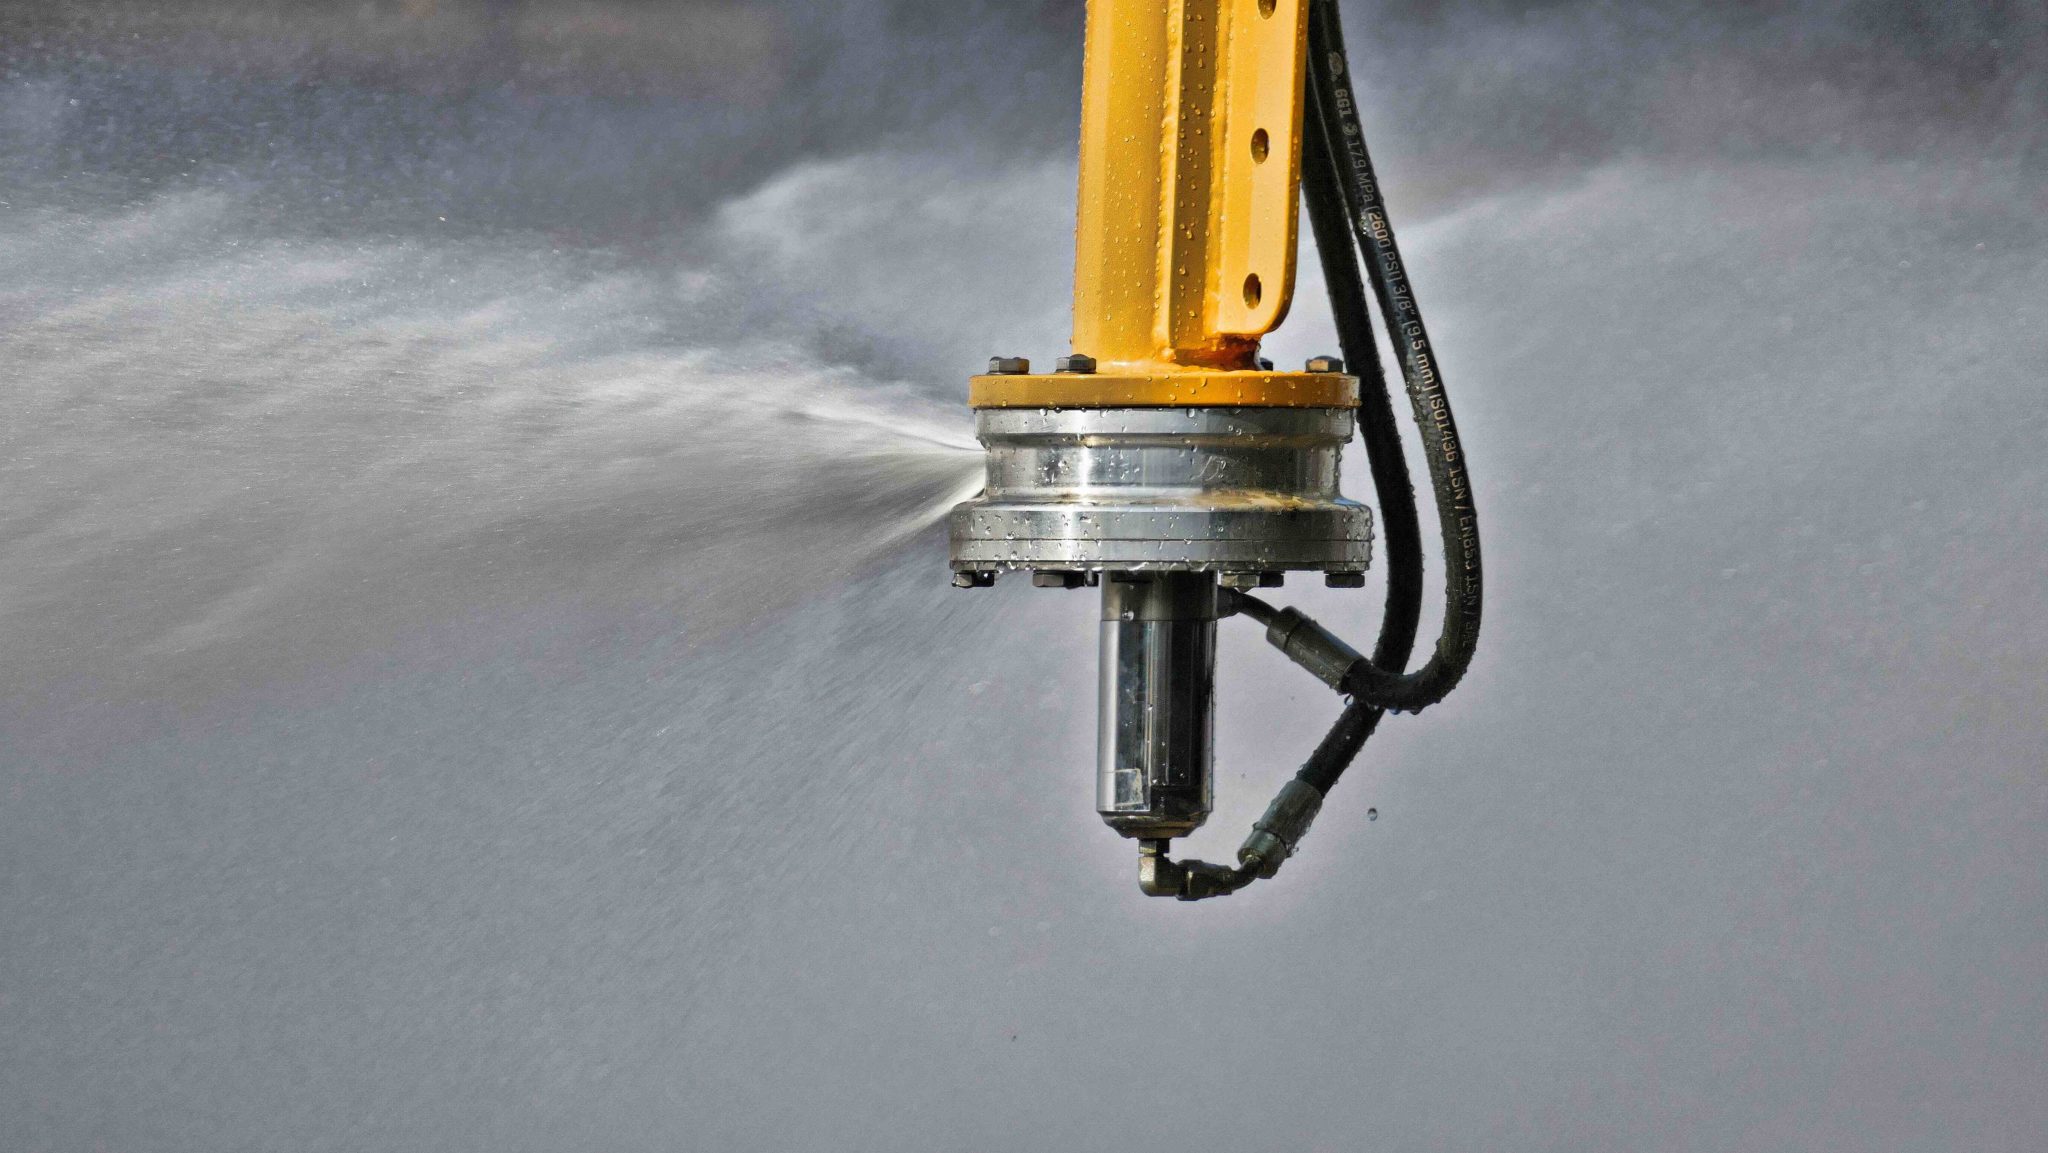 global-road-technology-dust-suppression-using-sprinklers-grt